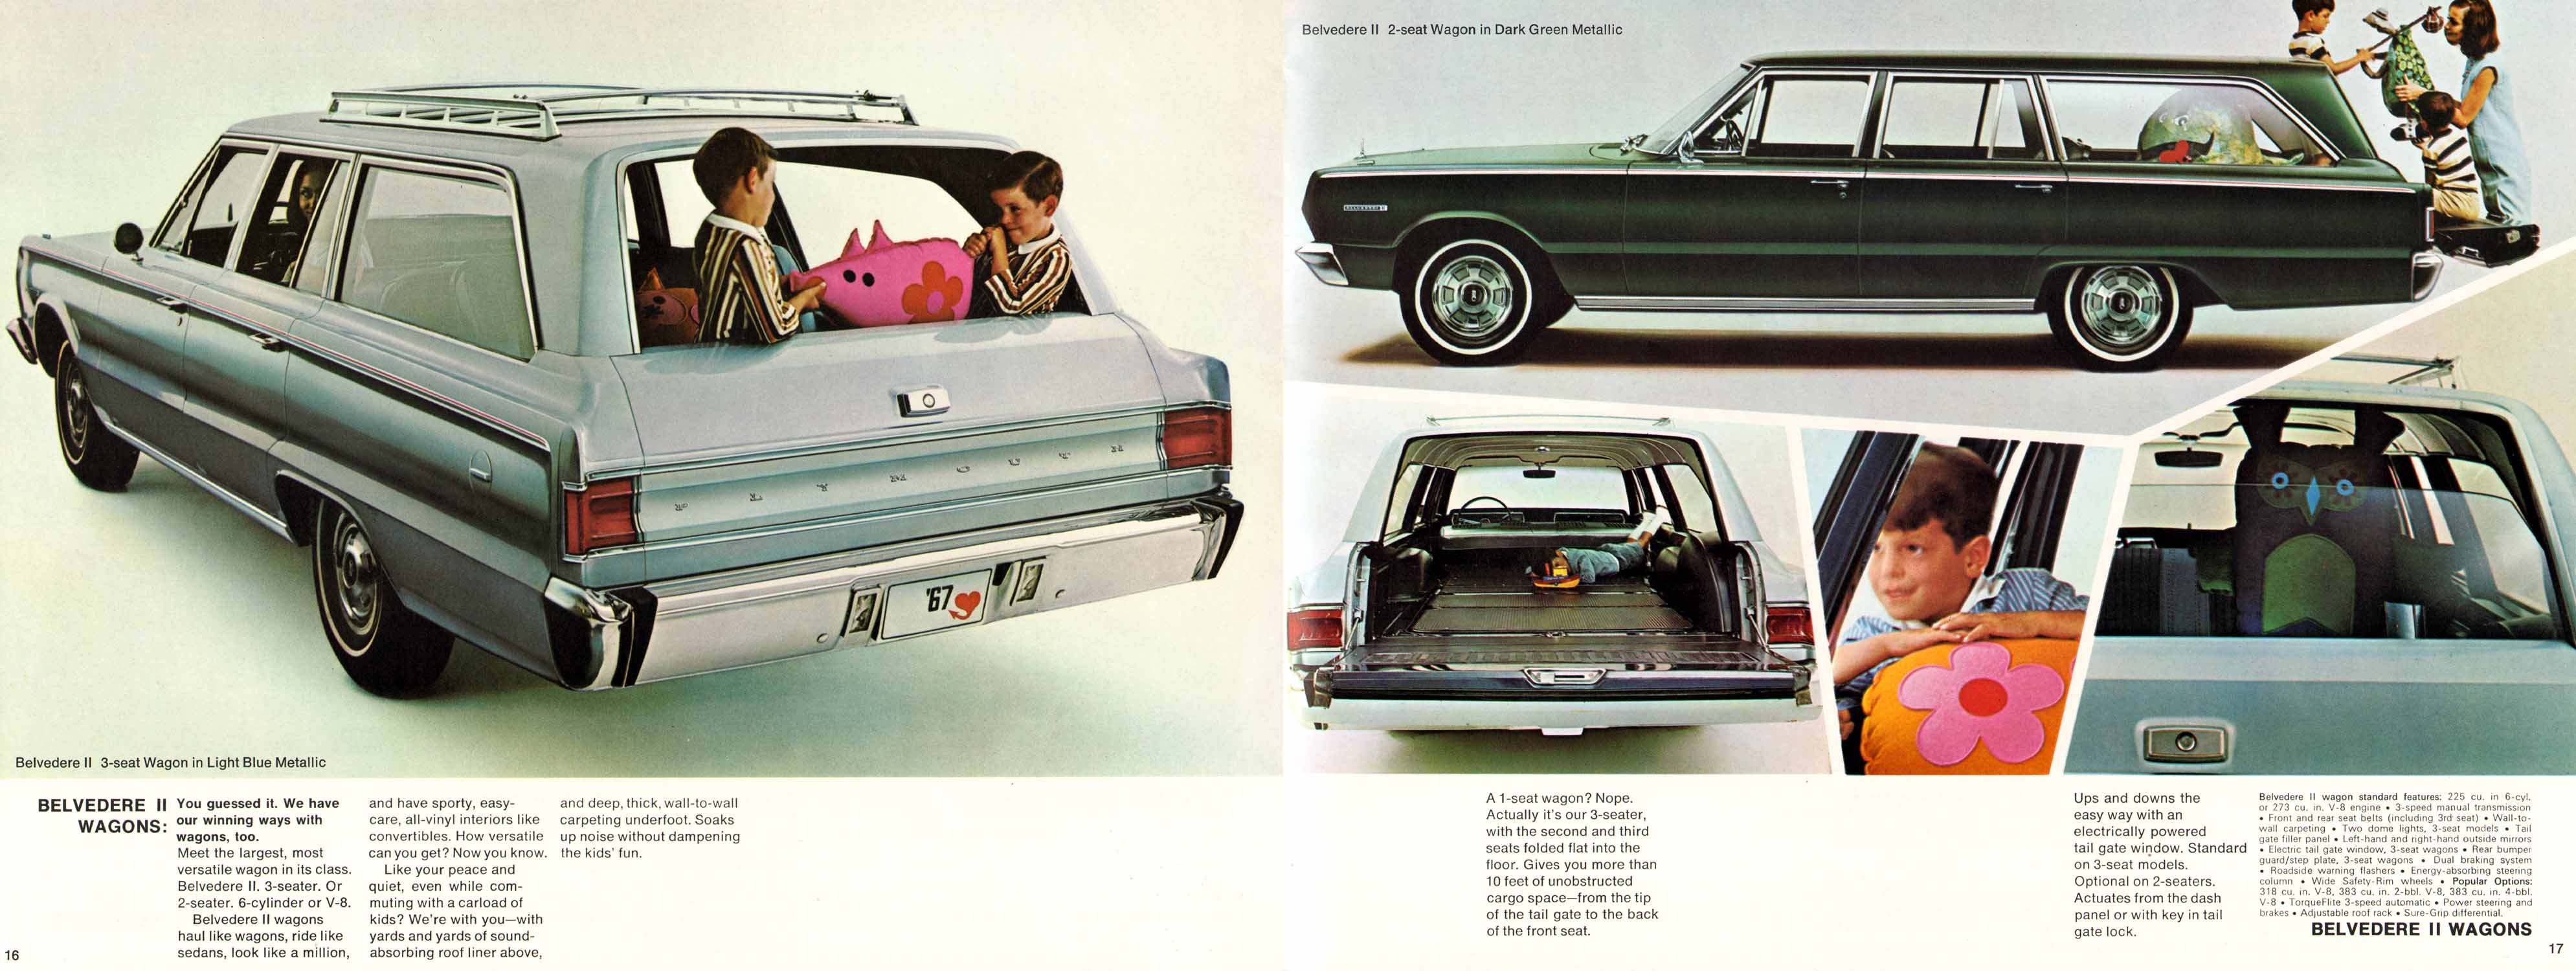 1967 Plymouth Belvedere-16-17